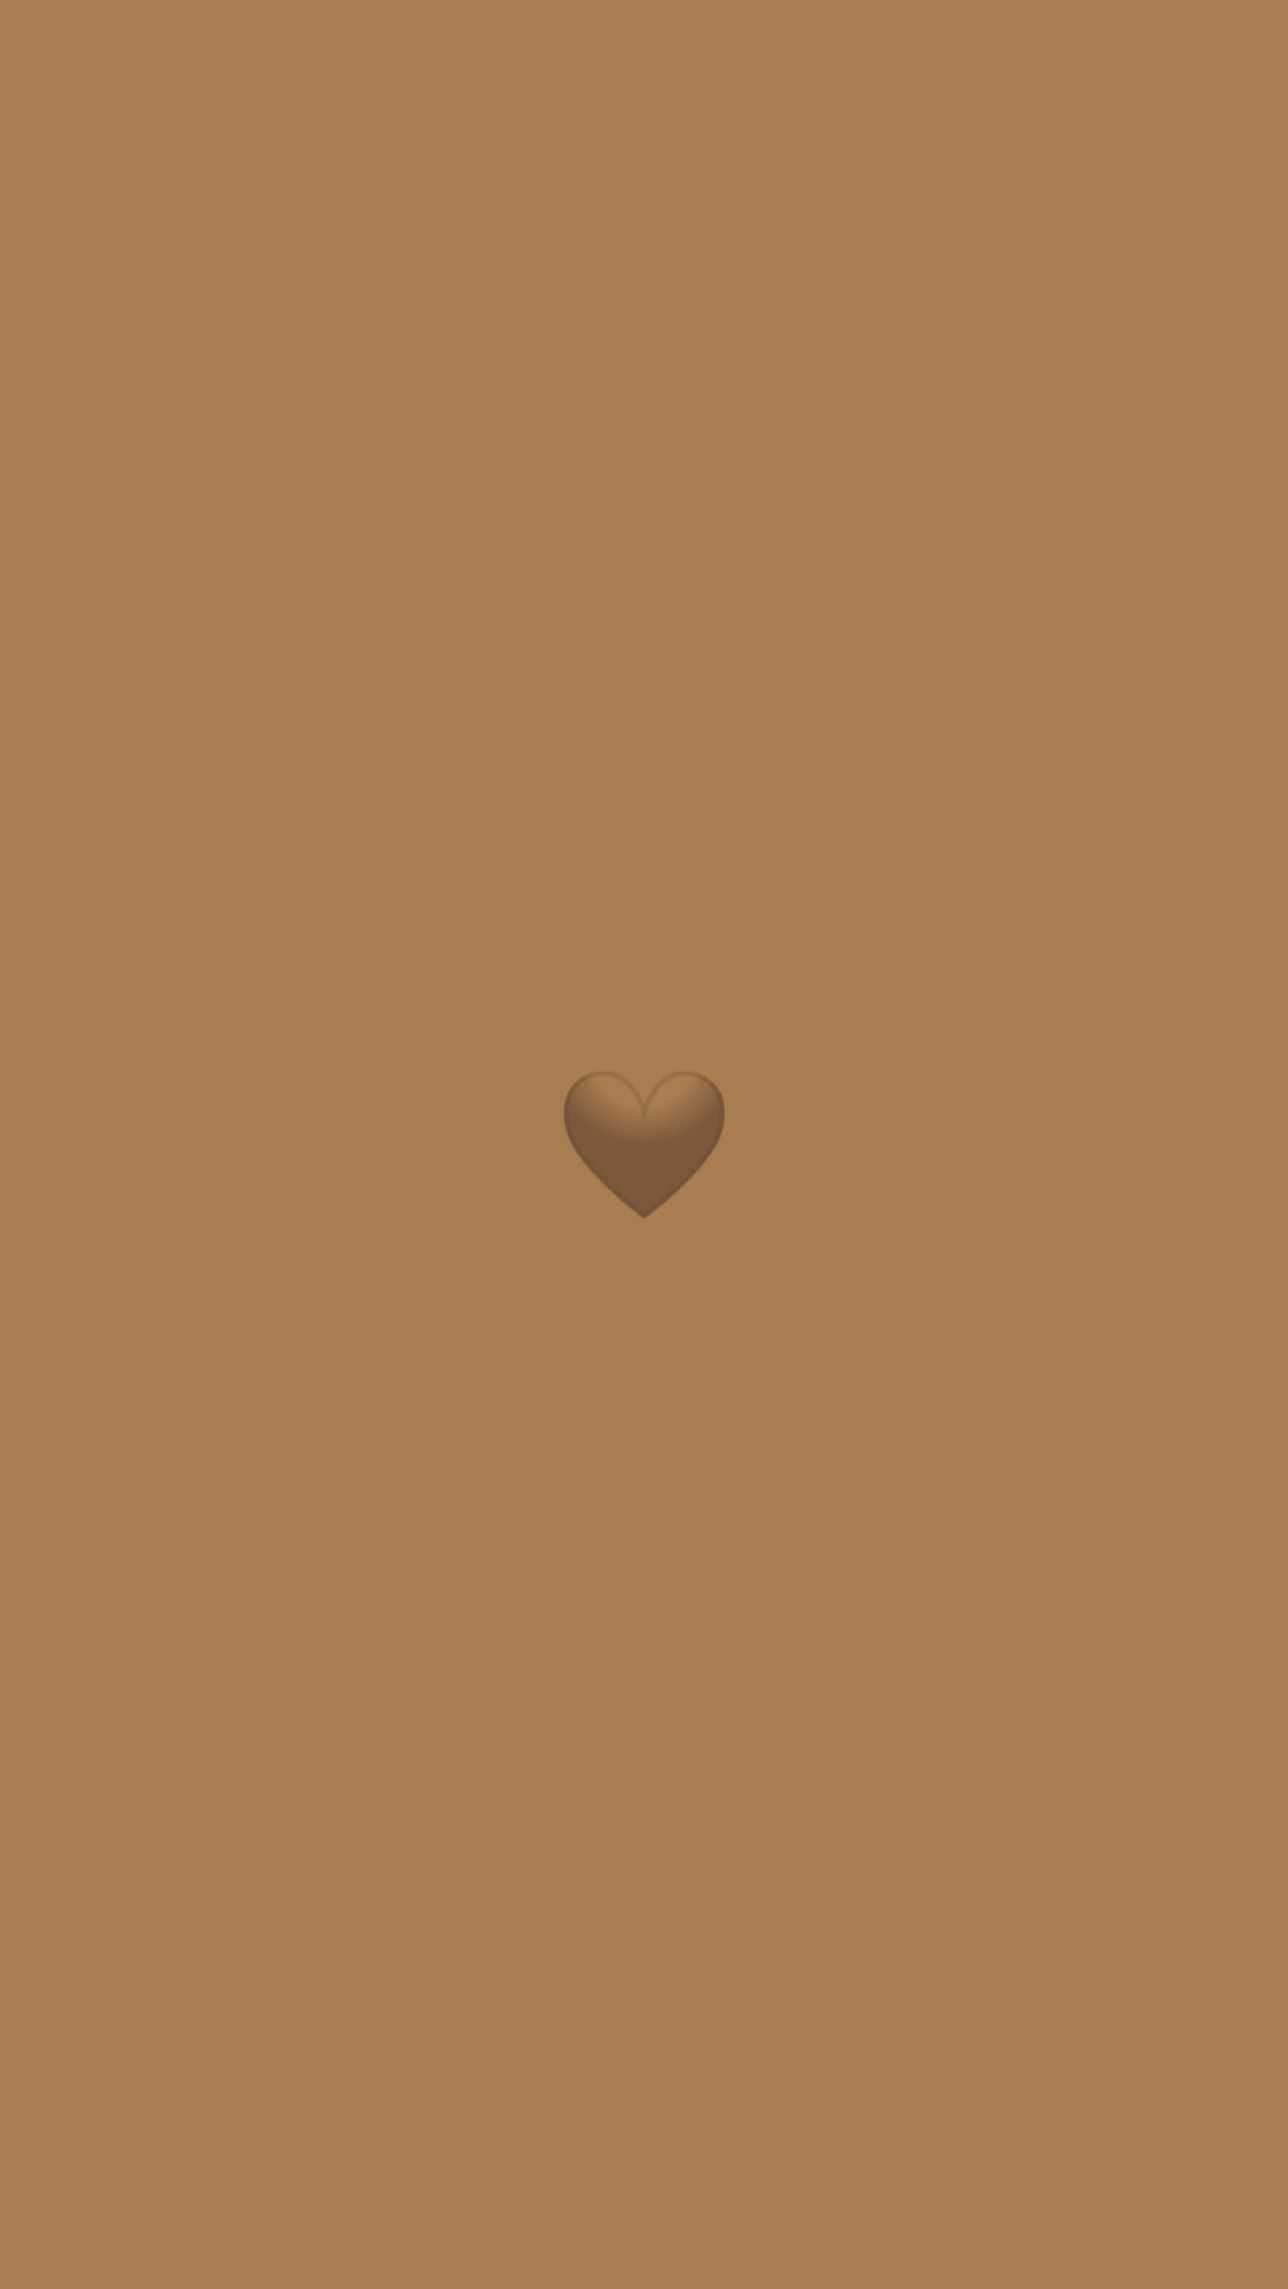 Brown Aesthetic Desktop Wallpaper Images  Free Photos PNG Stickers  Wallpapers  Backgrounds  rawpixel